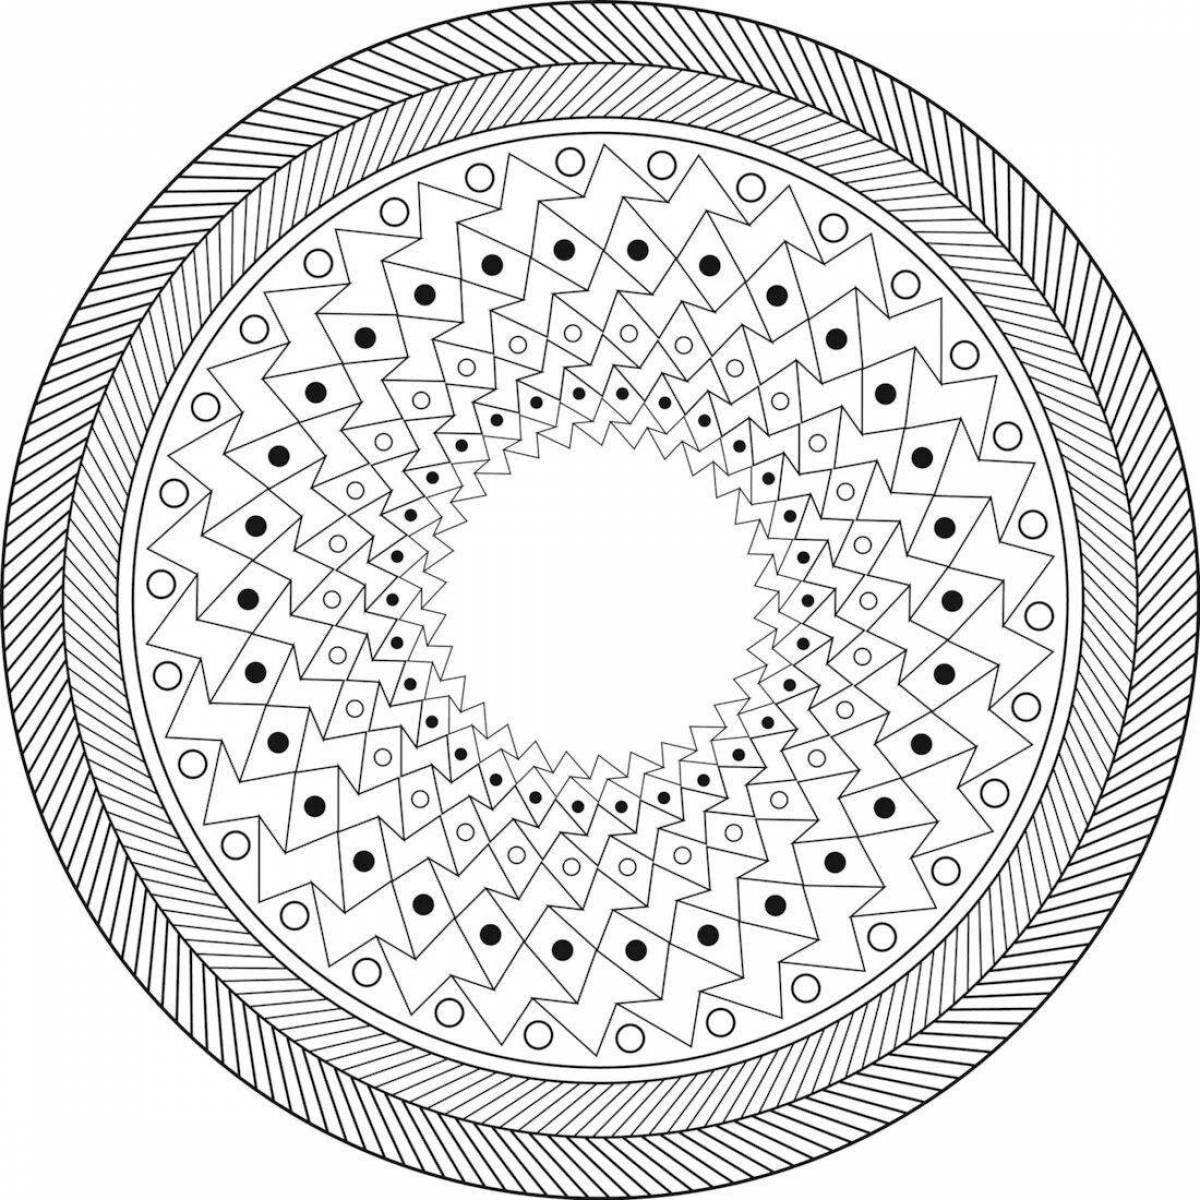 Coloring page with a fascinating circular pattern